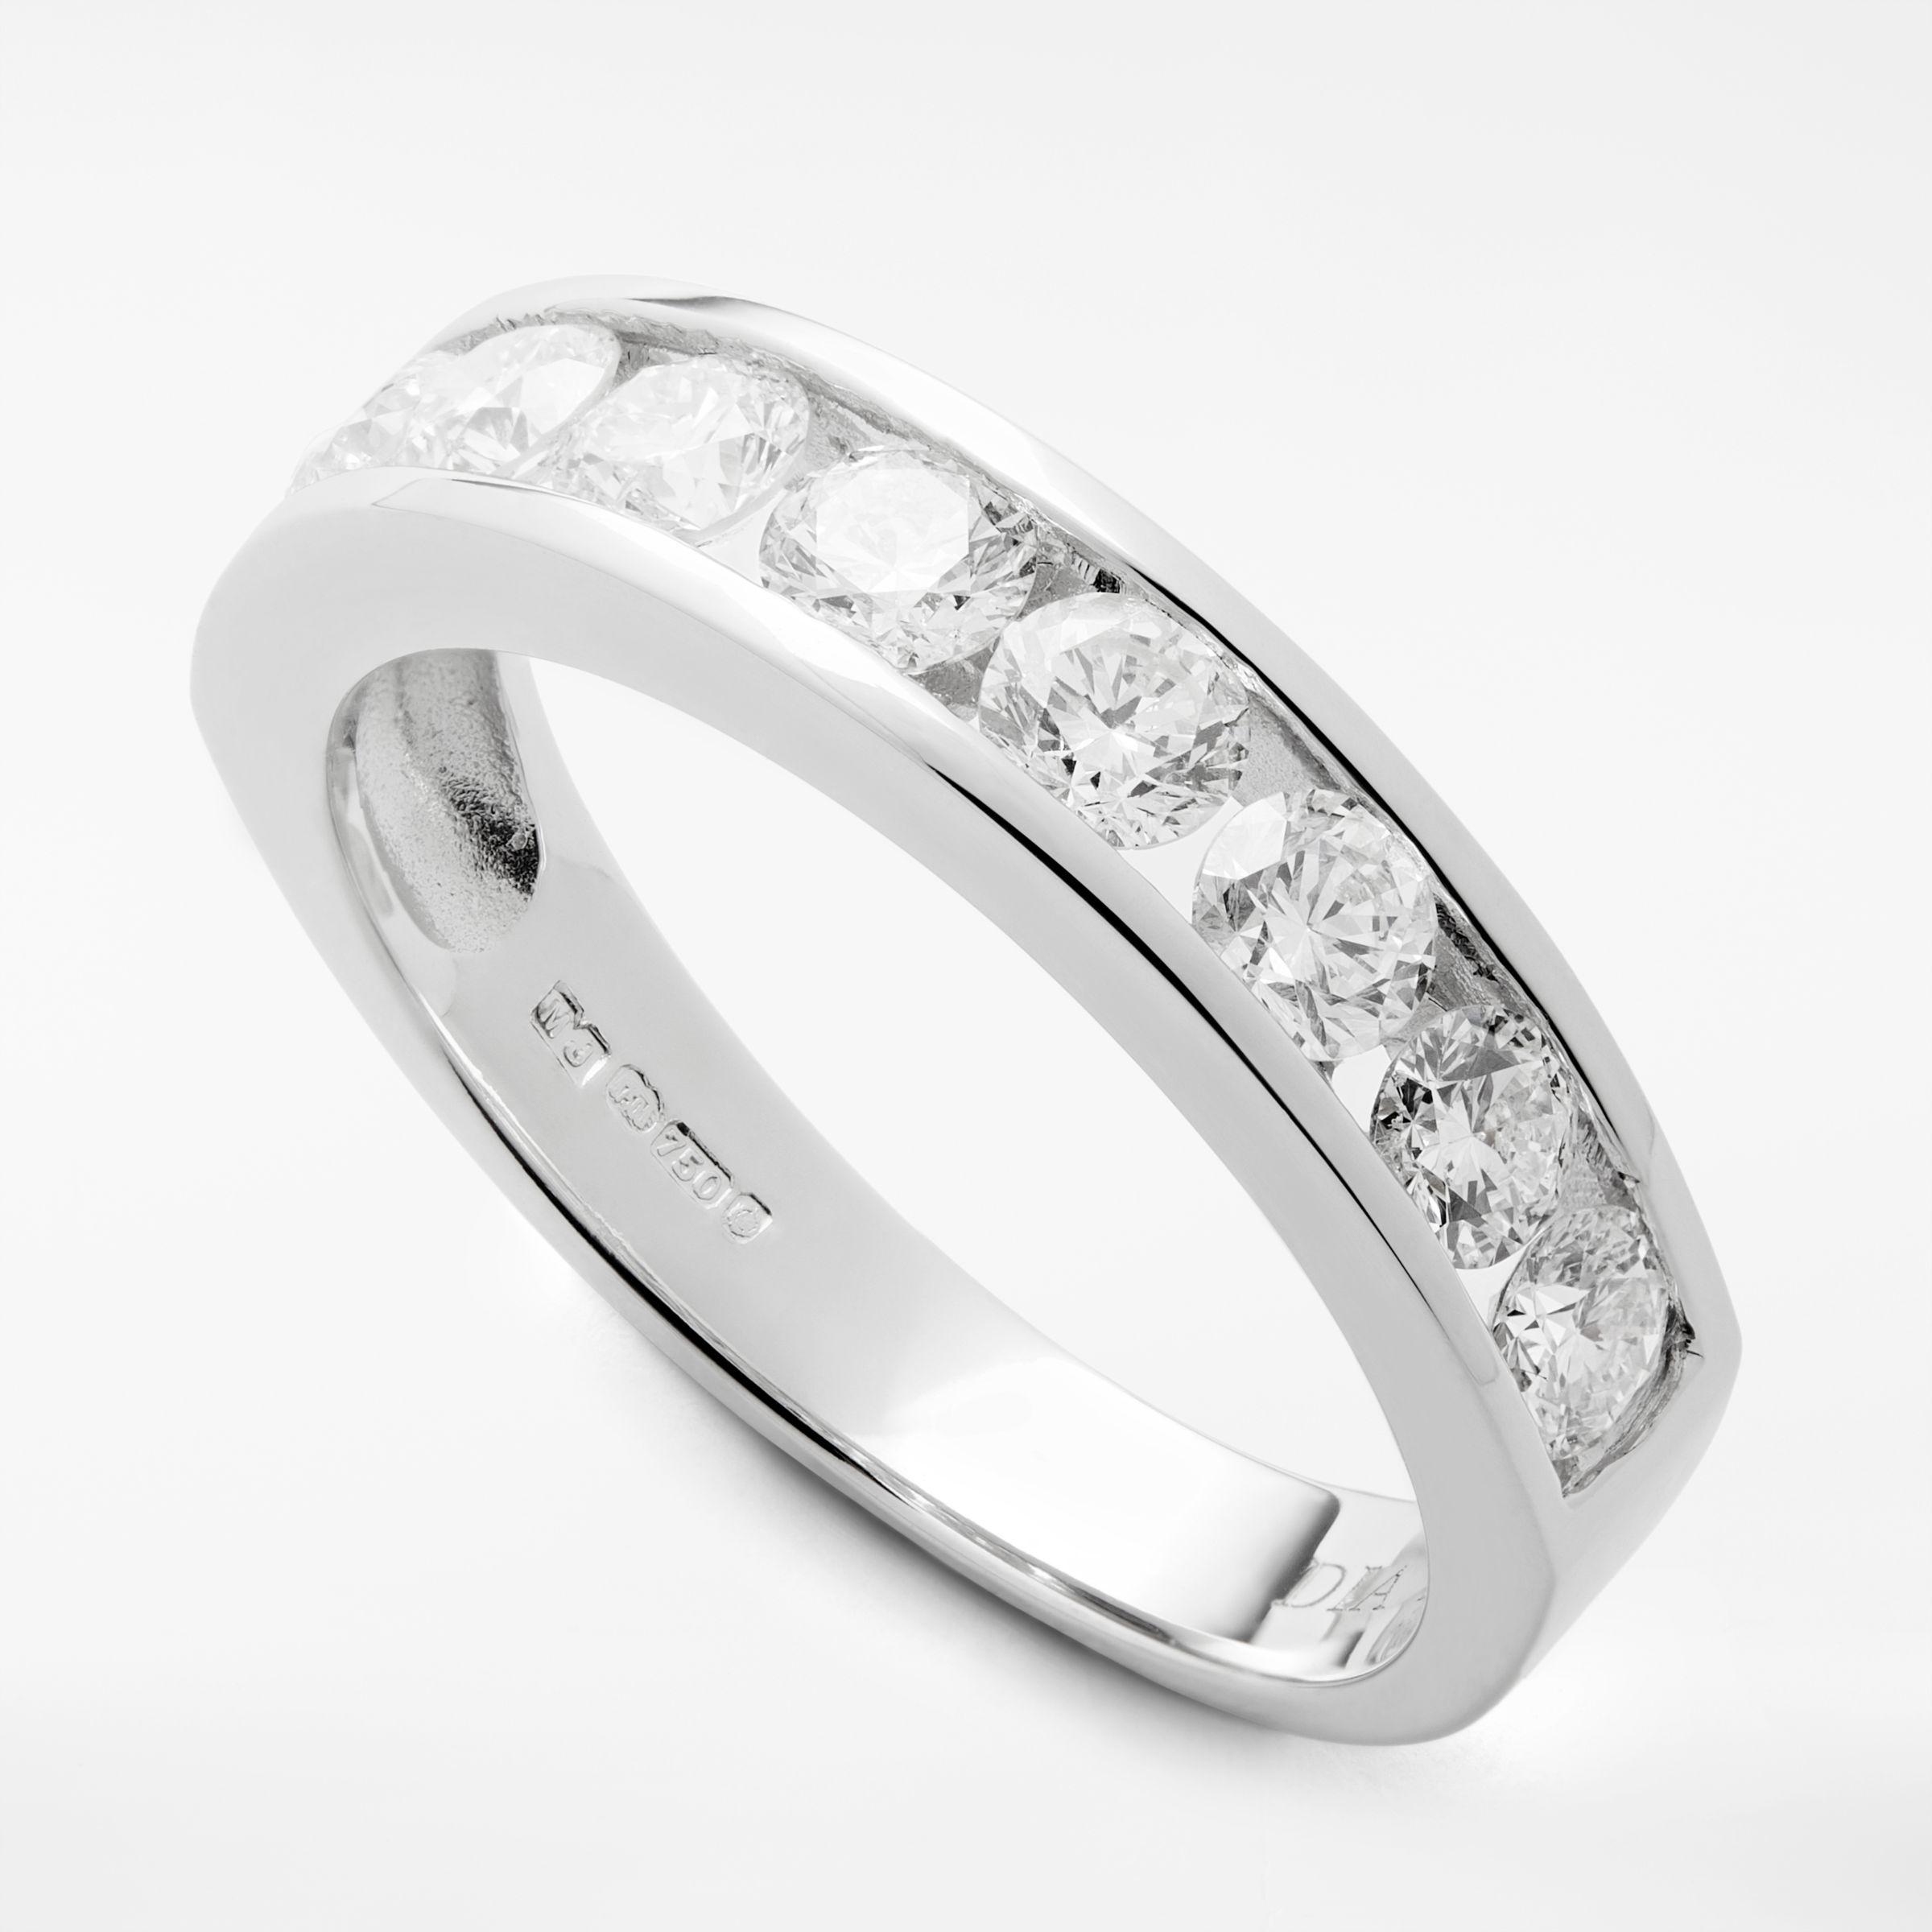 Buy Mogul 18ct White Gold Round Brilliant Channel Set Diamond Eternity Ring, 1ct Online at johnlewis.com